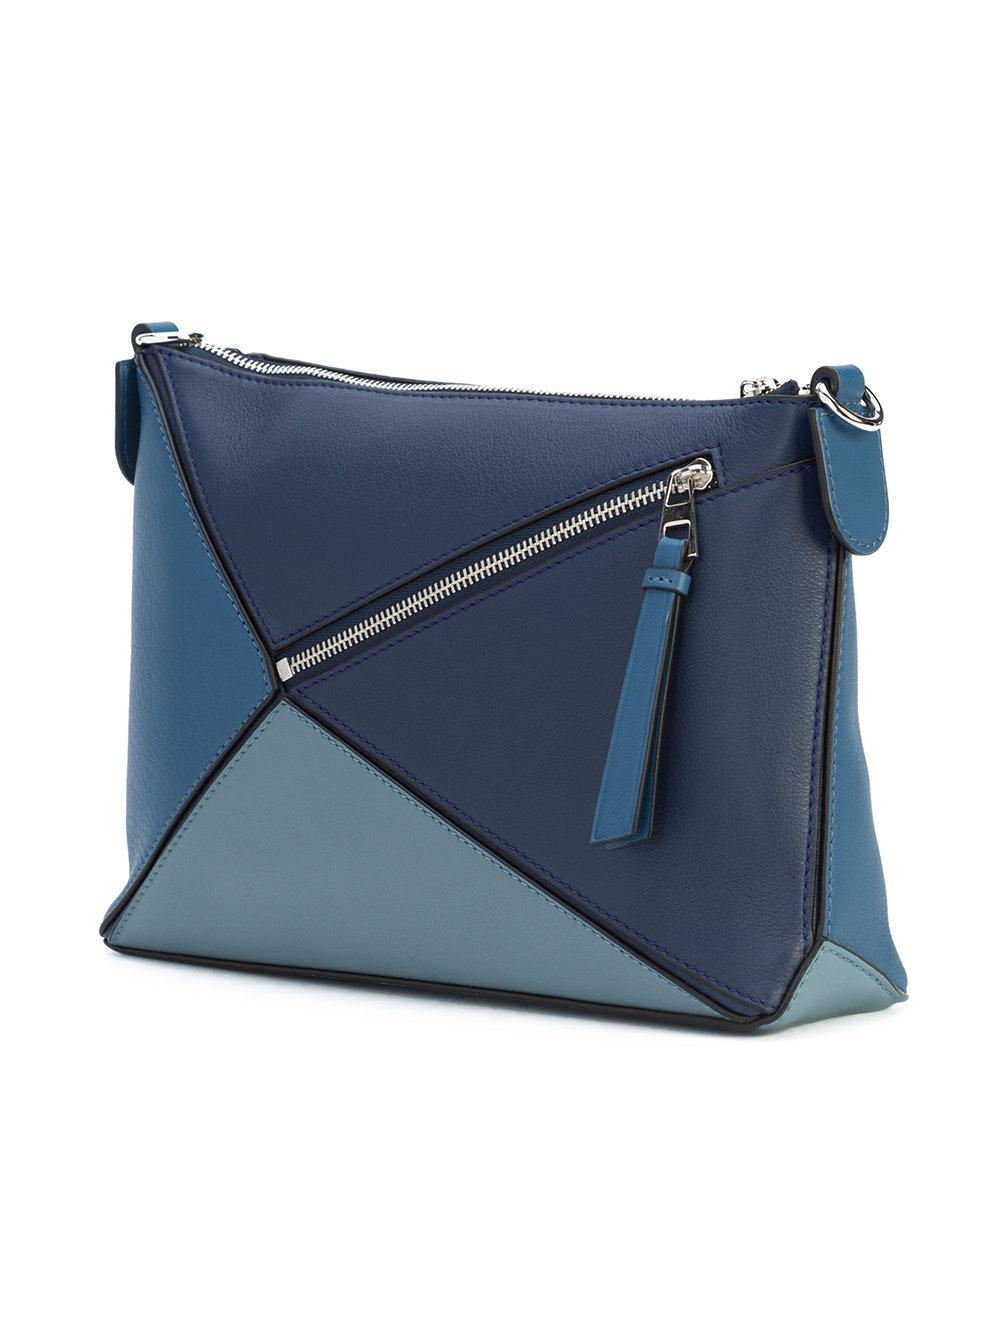 Loewe Leather Puzzle Pochette Bag in 